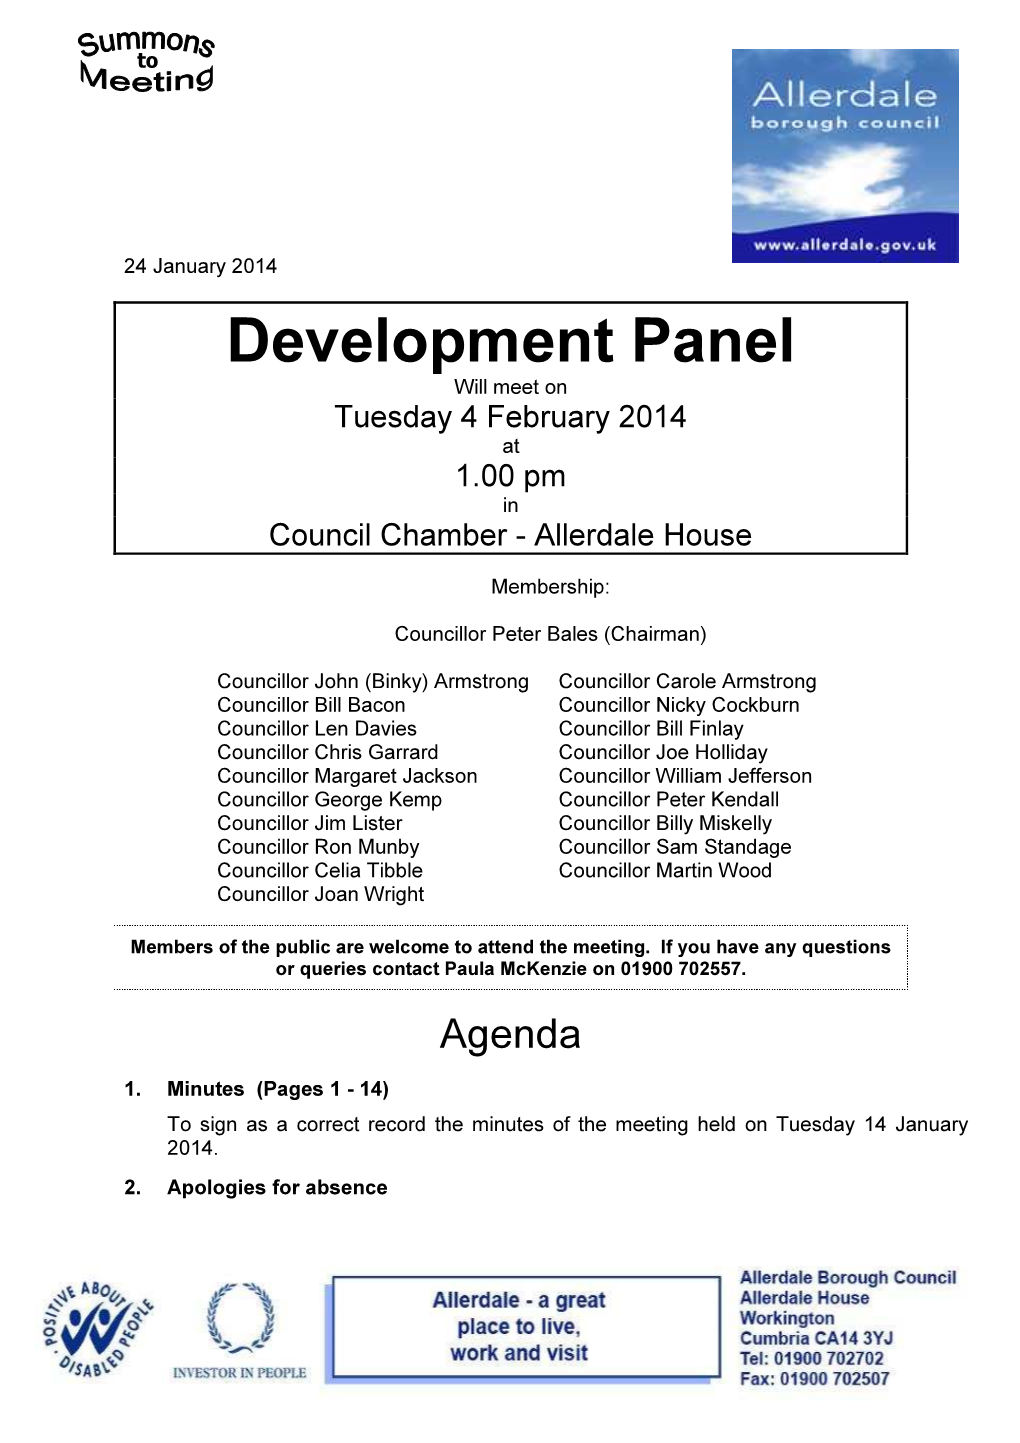 Development Panel Will Meet on Tuesday 4 February 2014 at 1.00 Pm in Council Chamber - Allerdale House